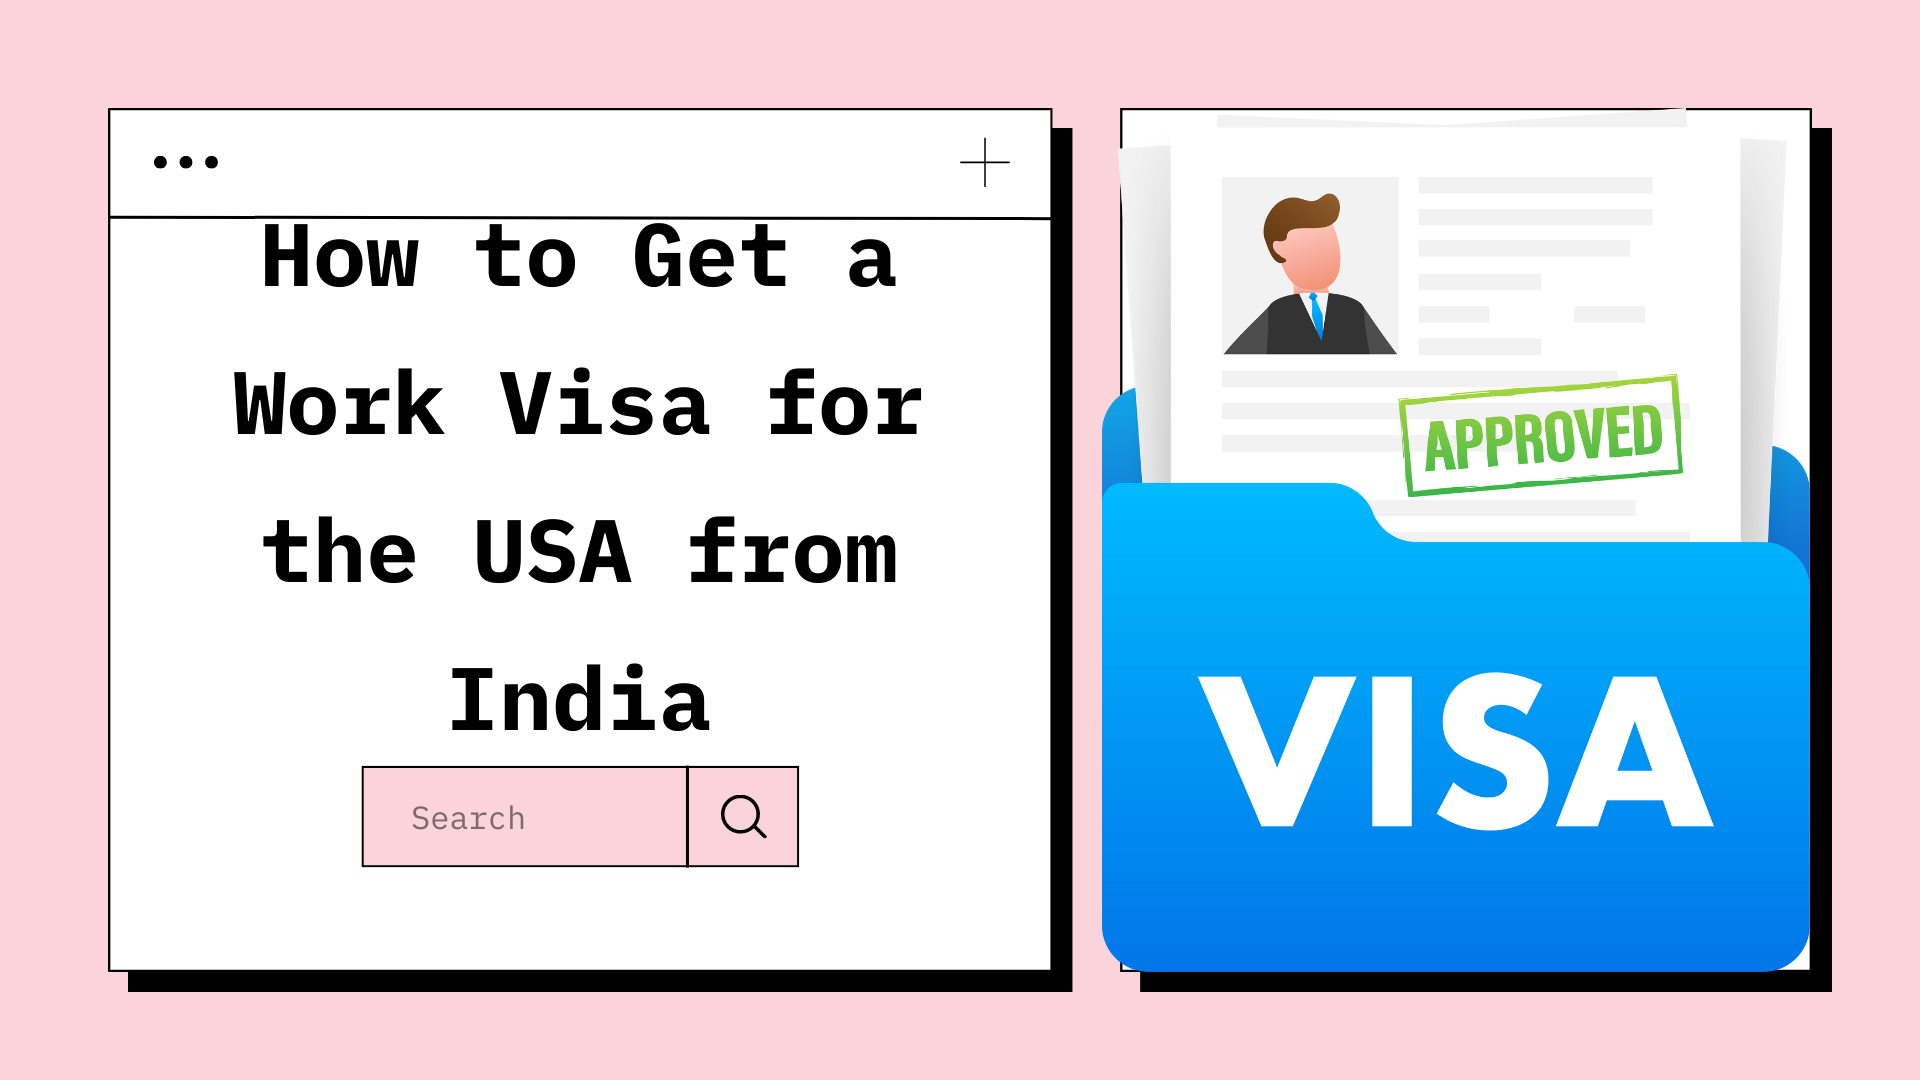 How to Get a Work Visa for the USA from India